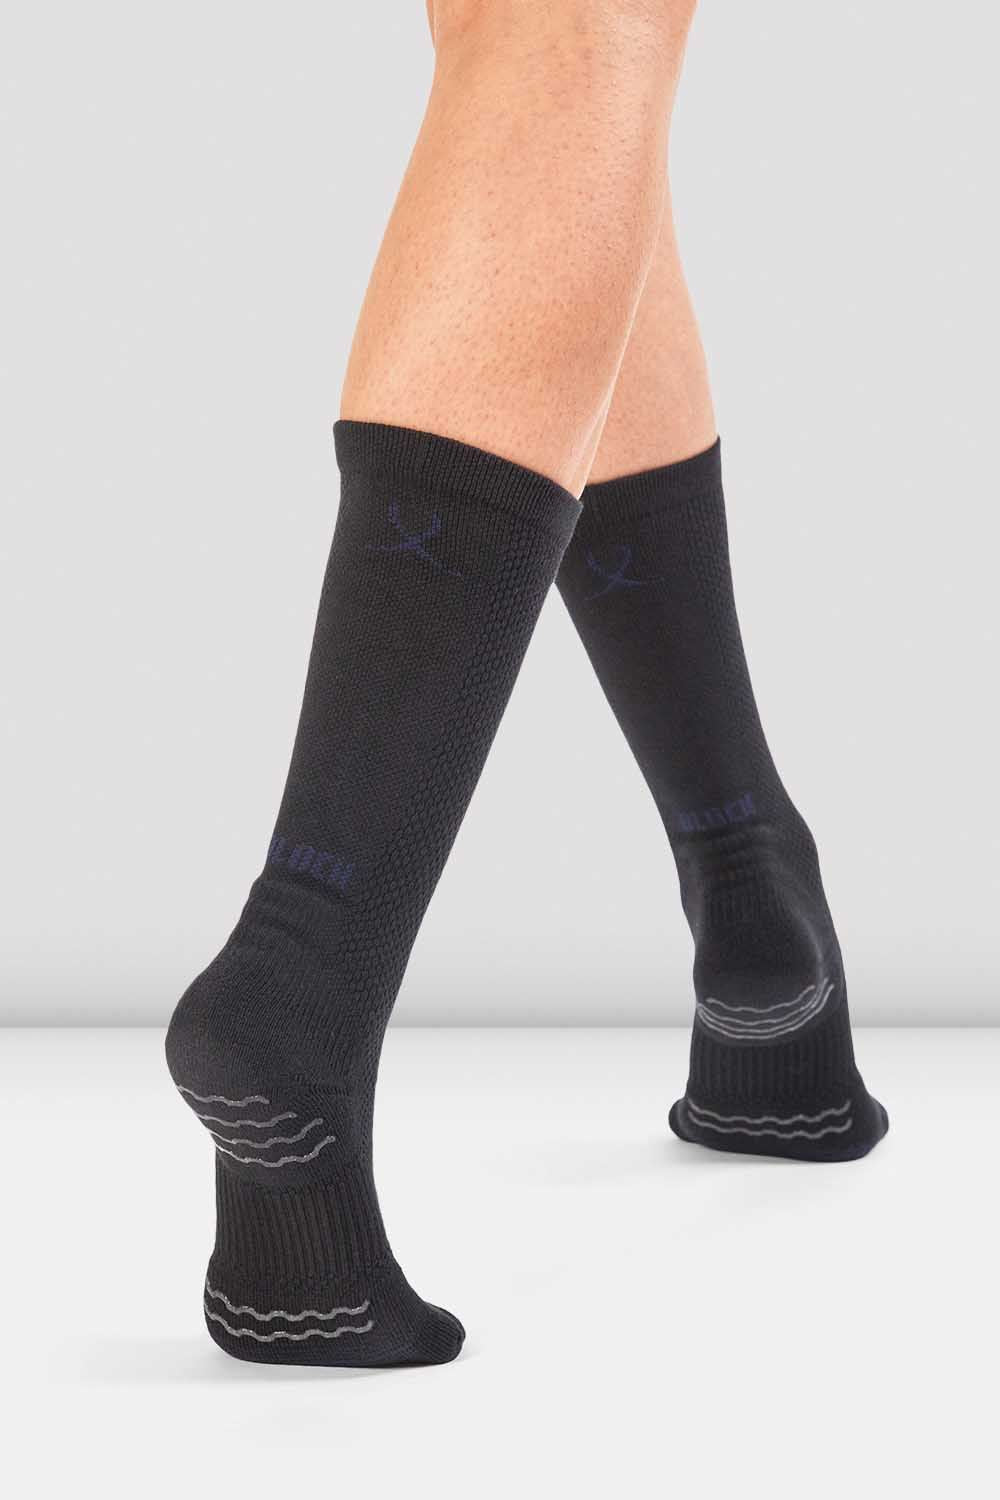 Professional Ballet Socks by Freed